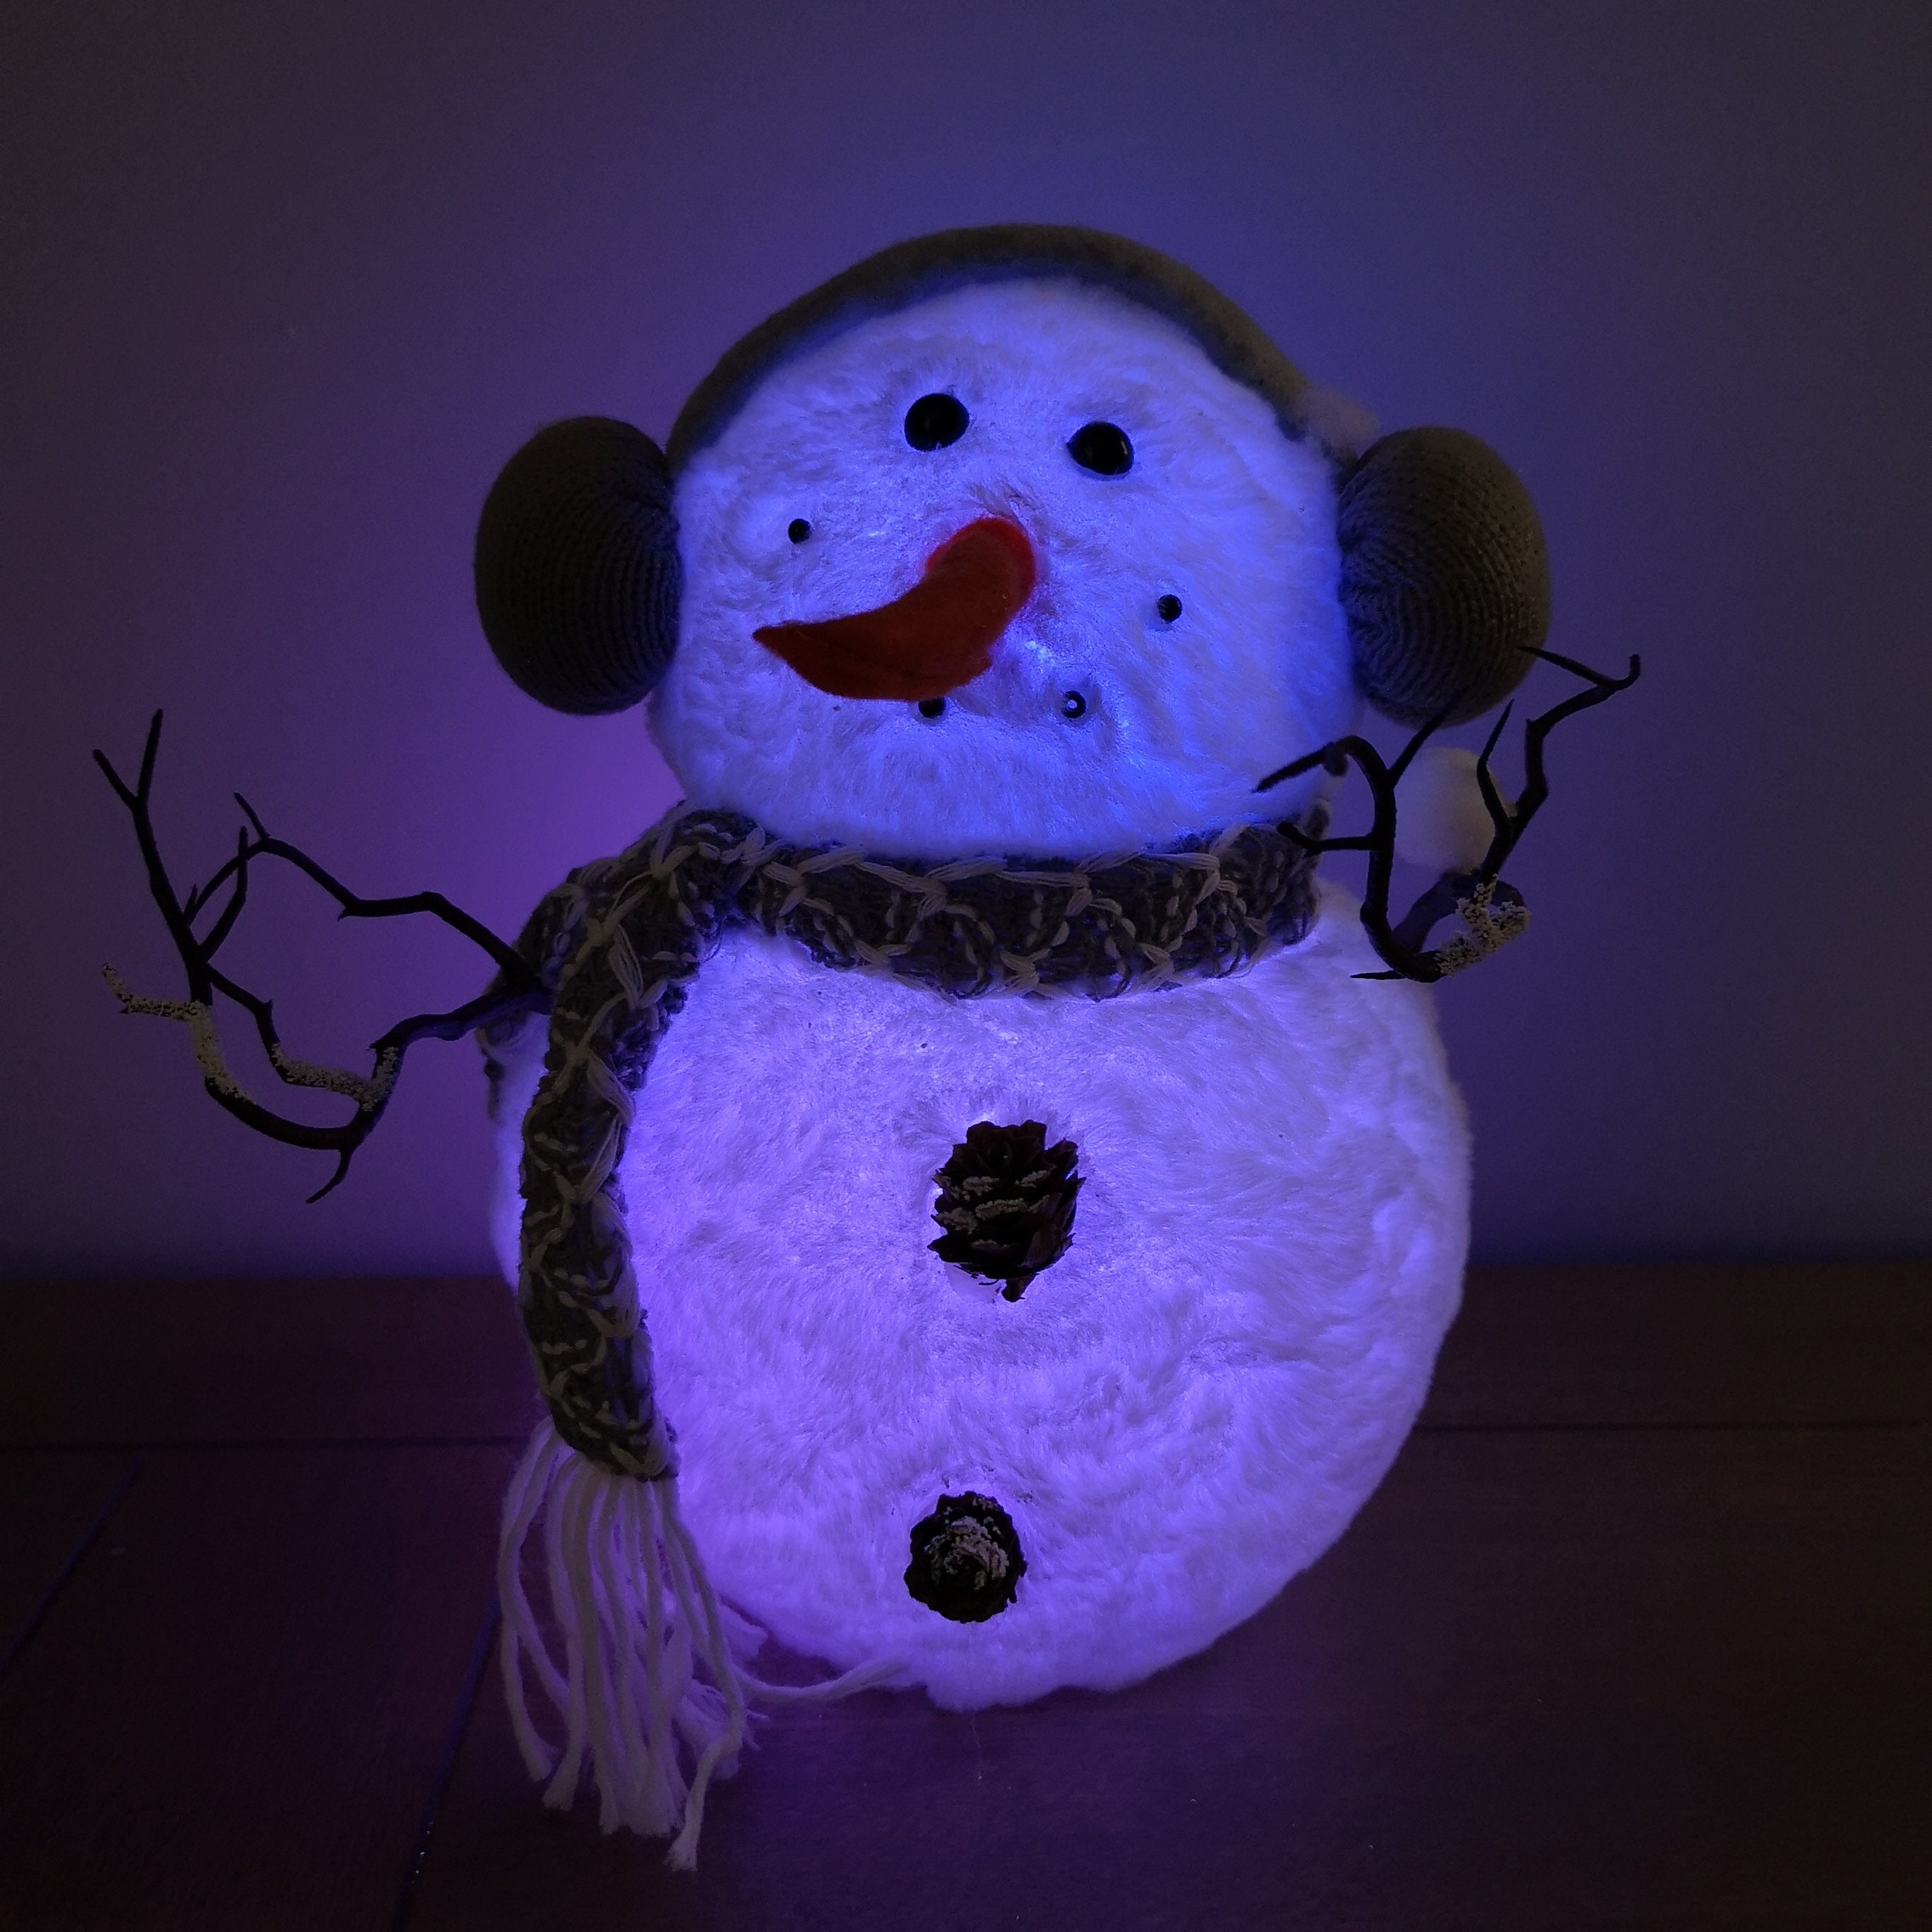 26cm Battery Operated LED Lit Colour Changing Snowman Christmas Decoration